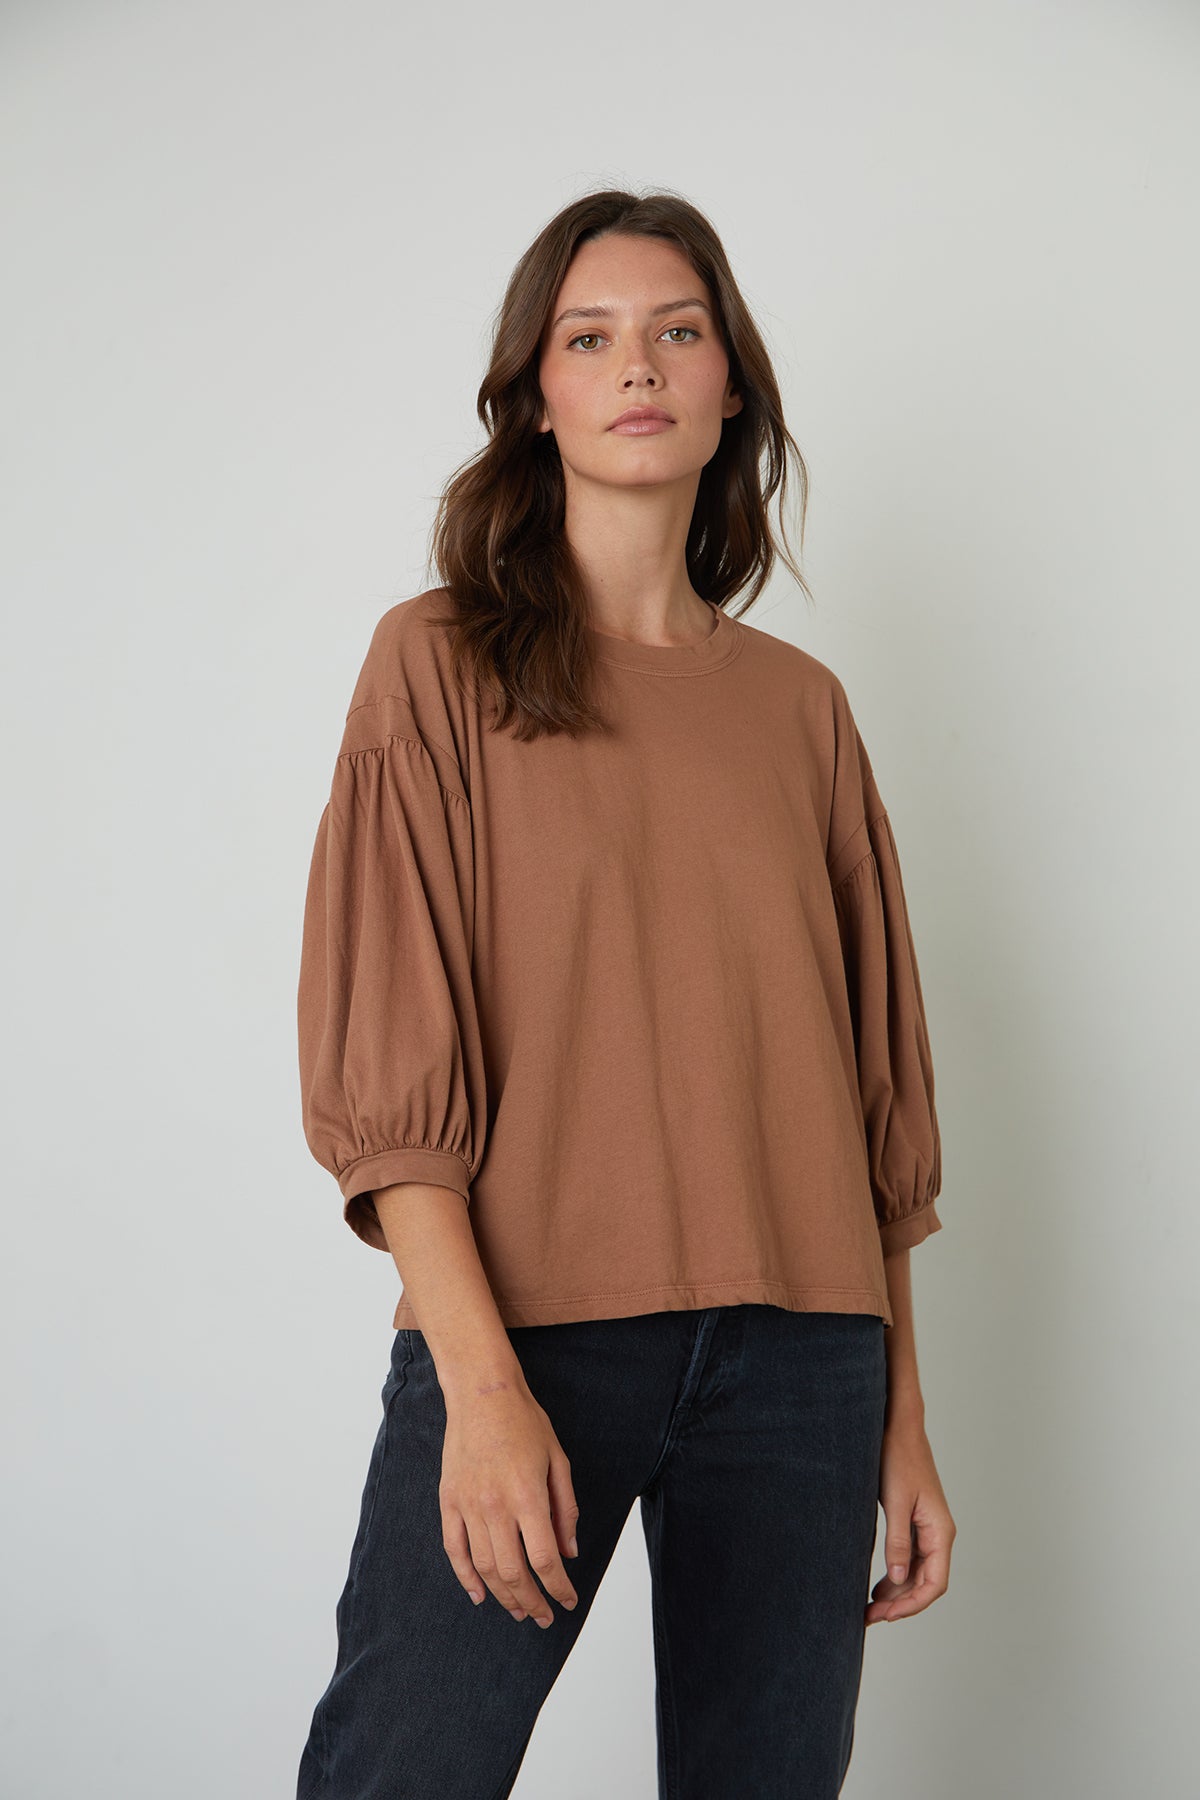 The Prudy 3/4 sleeve tee in tan brings volume to any outfit.-25577590161601